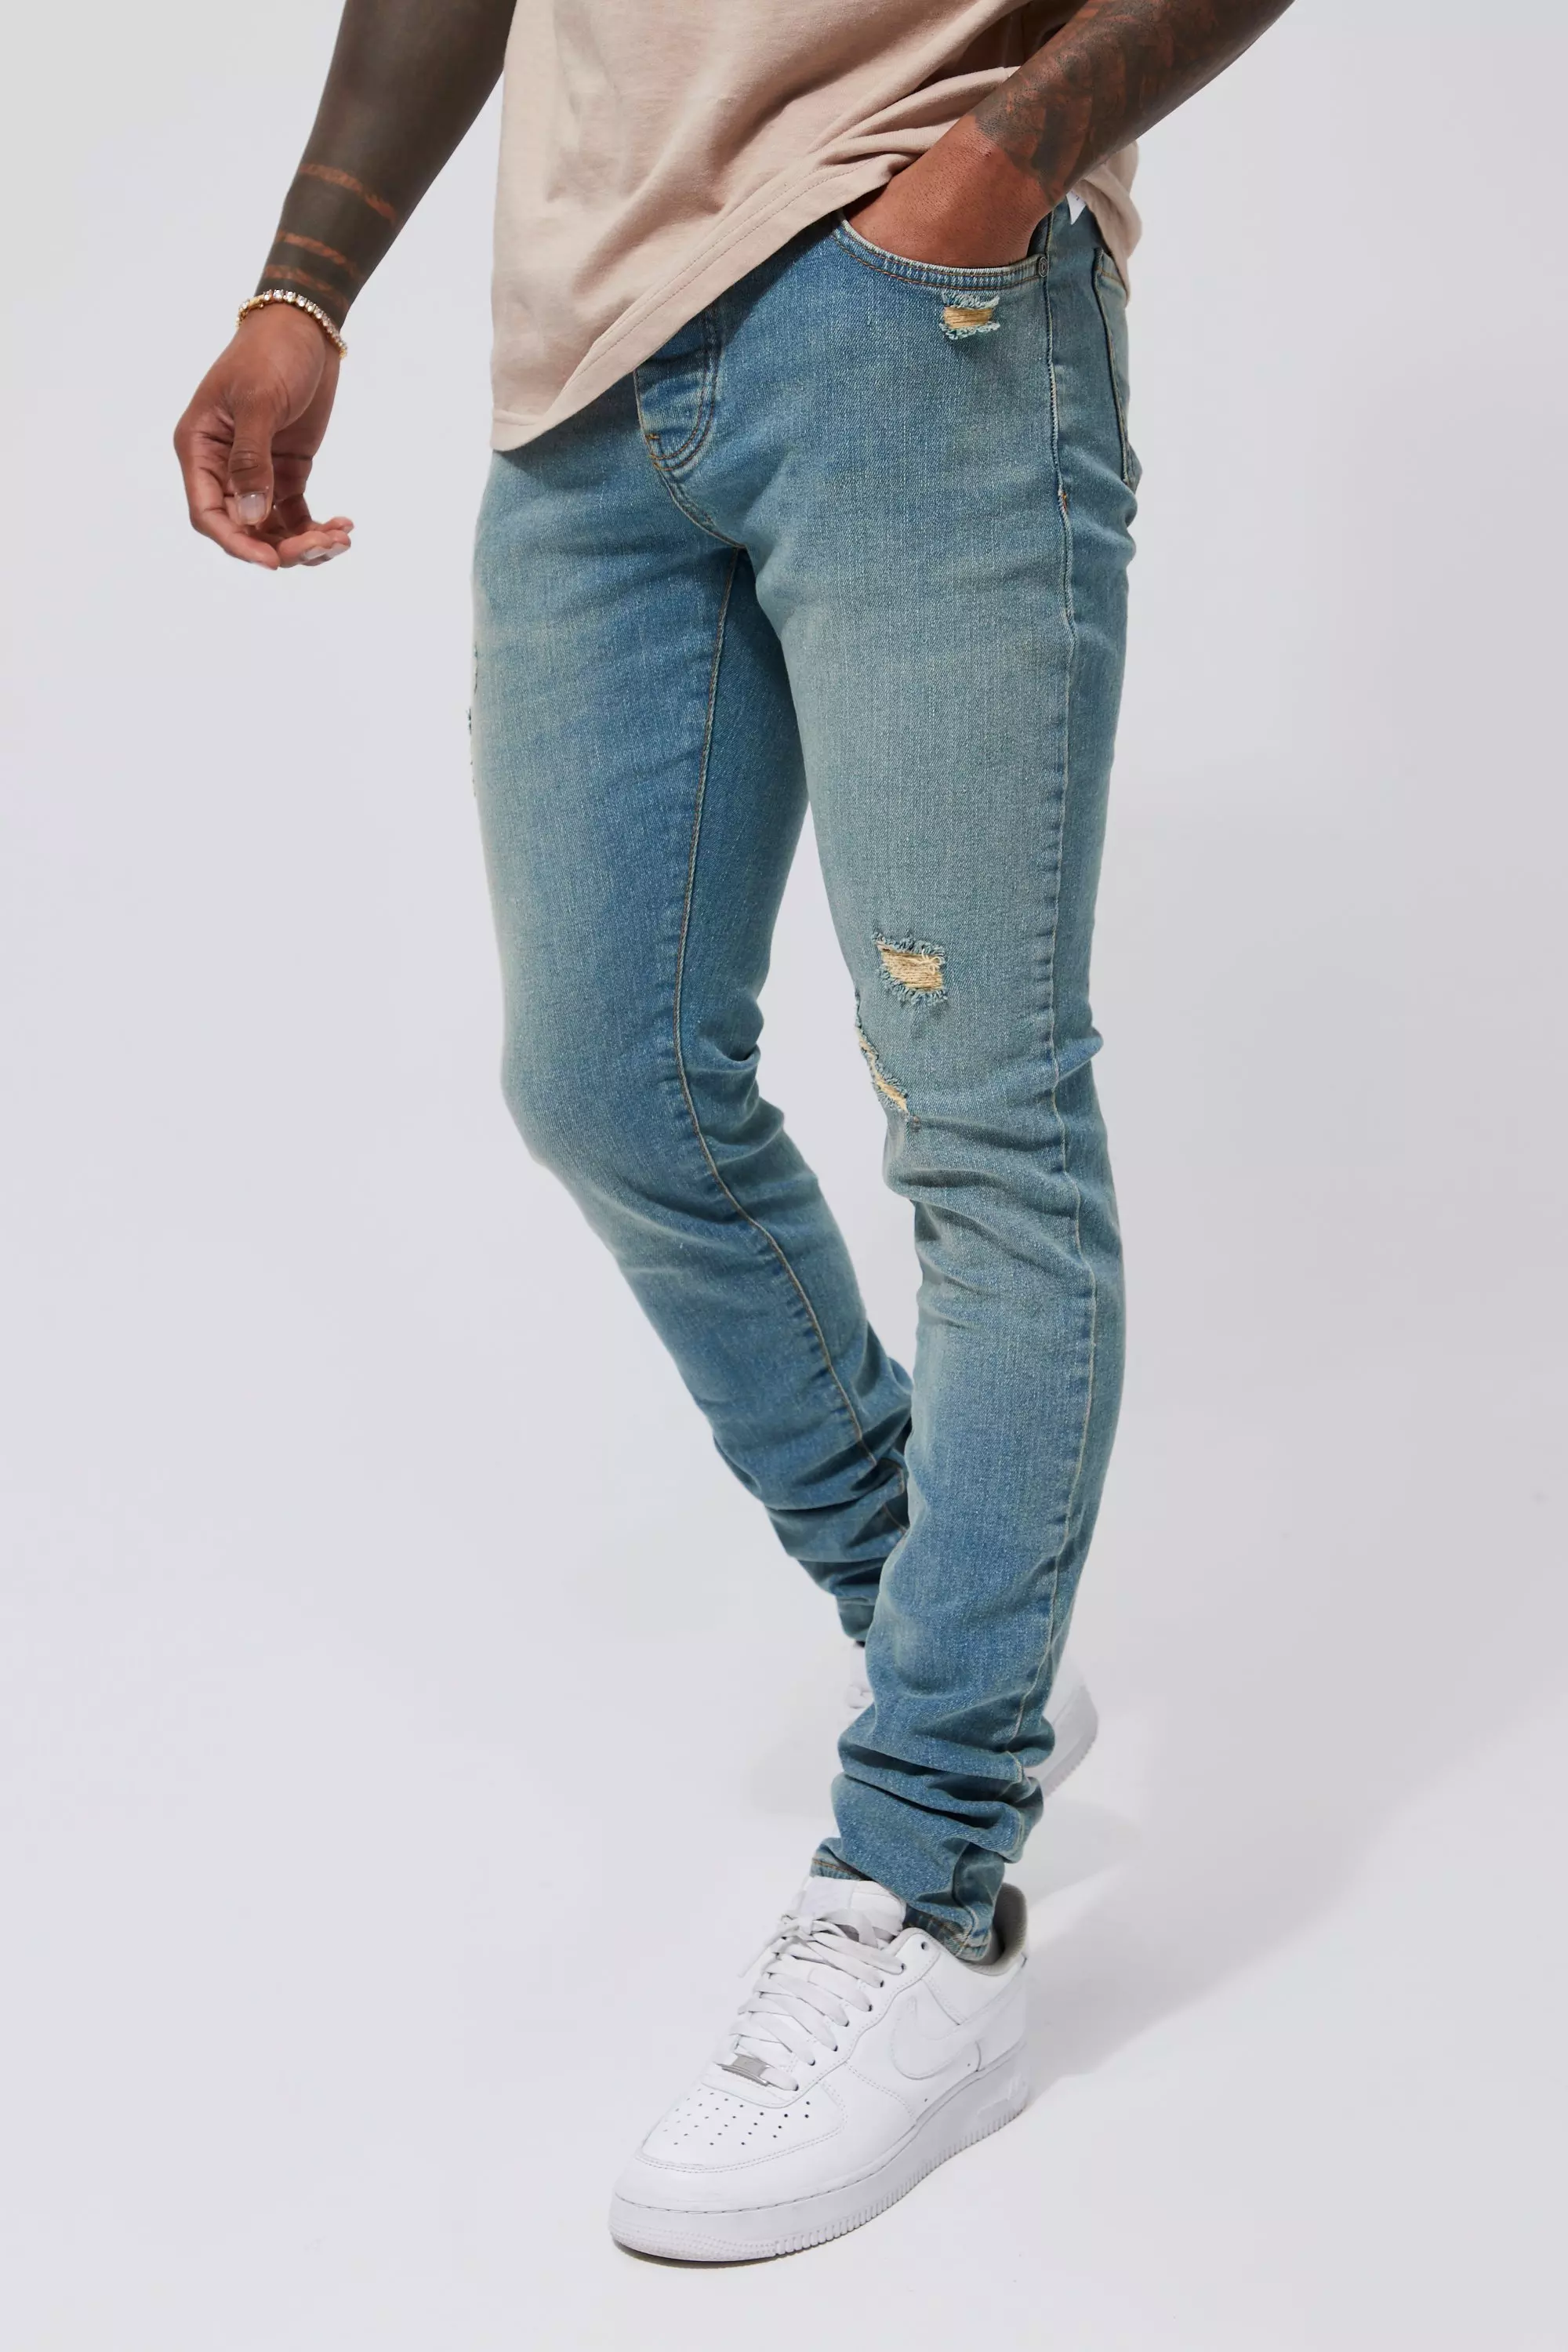 Blue Skinny Stacked Stretch Distressed Jeans